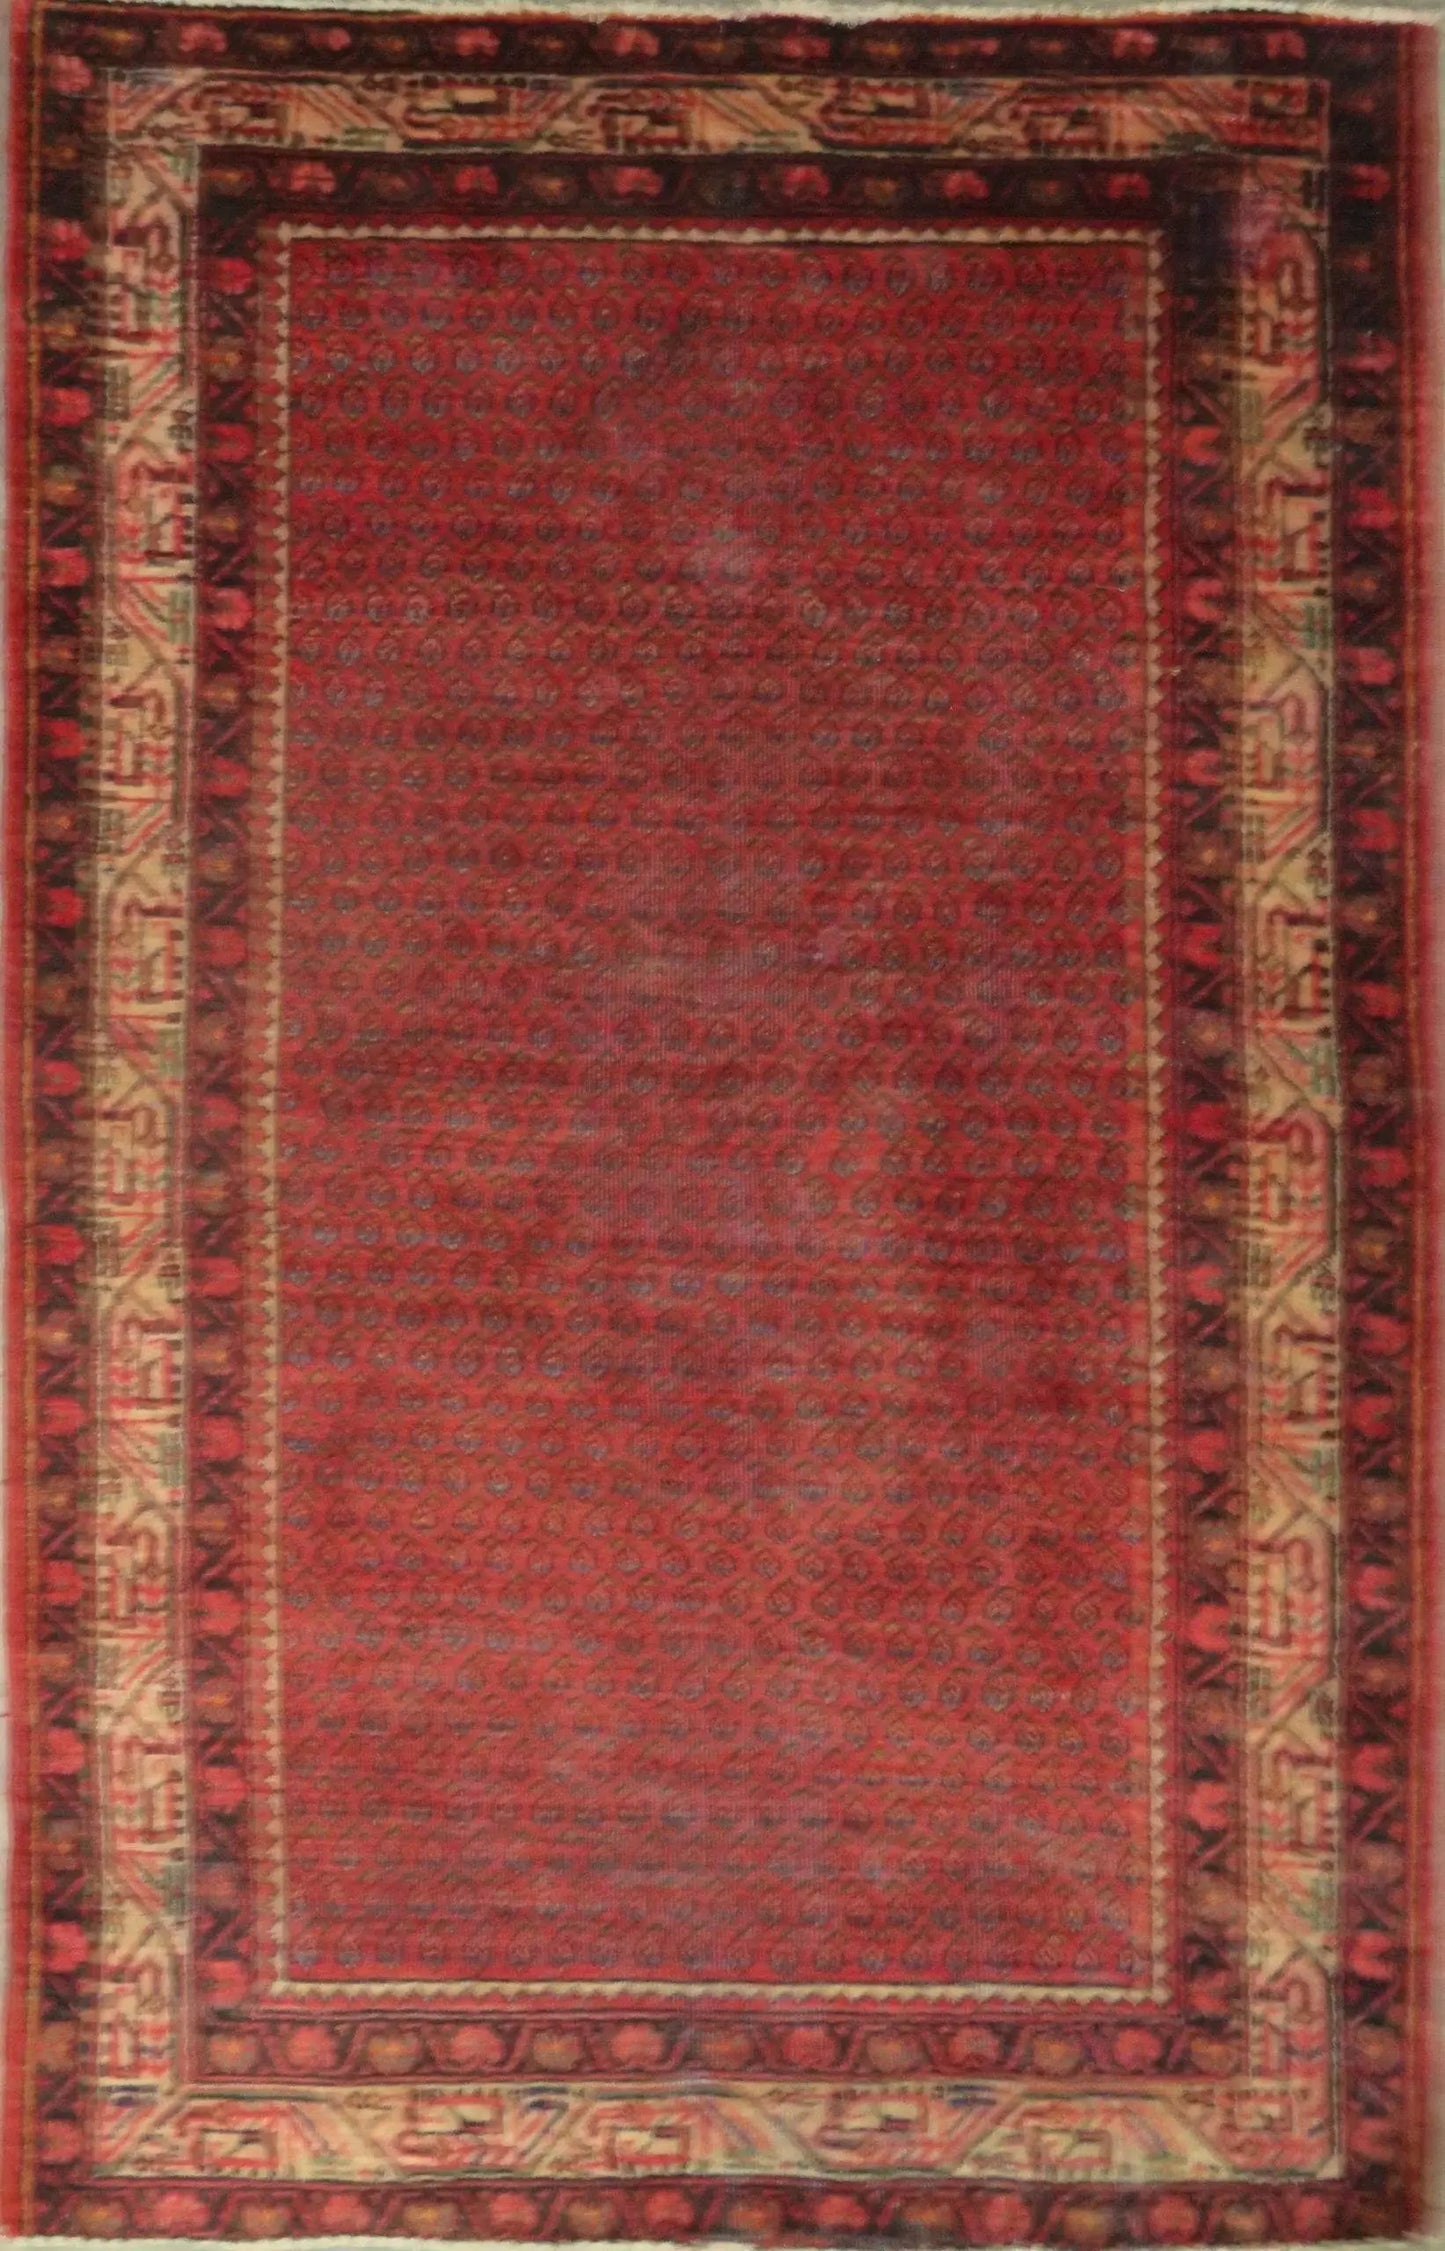 Hand-Knotted Vintage Rug 6'6" x 4'3"